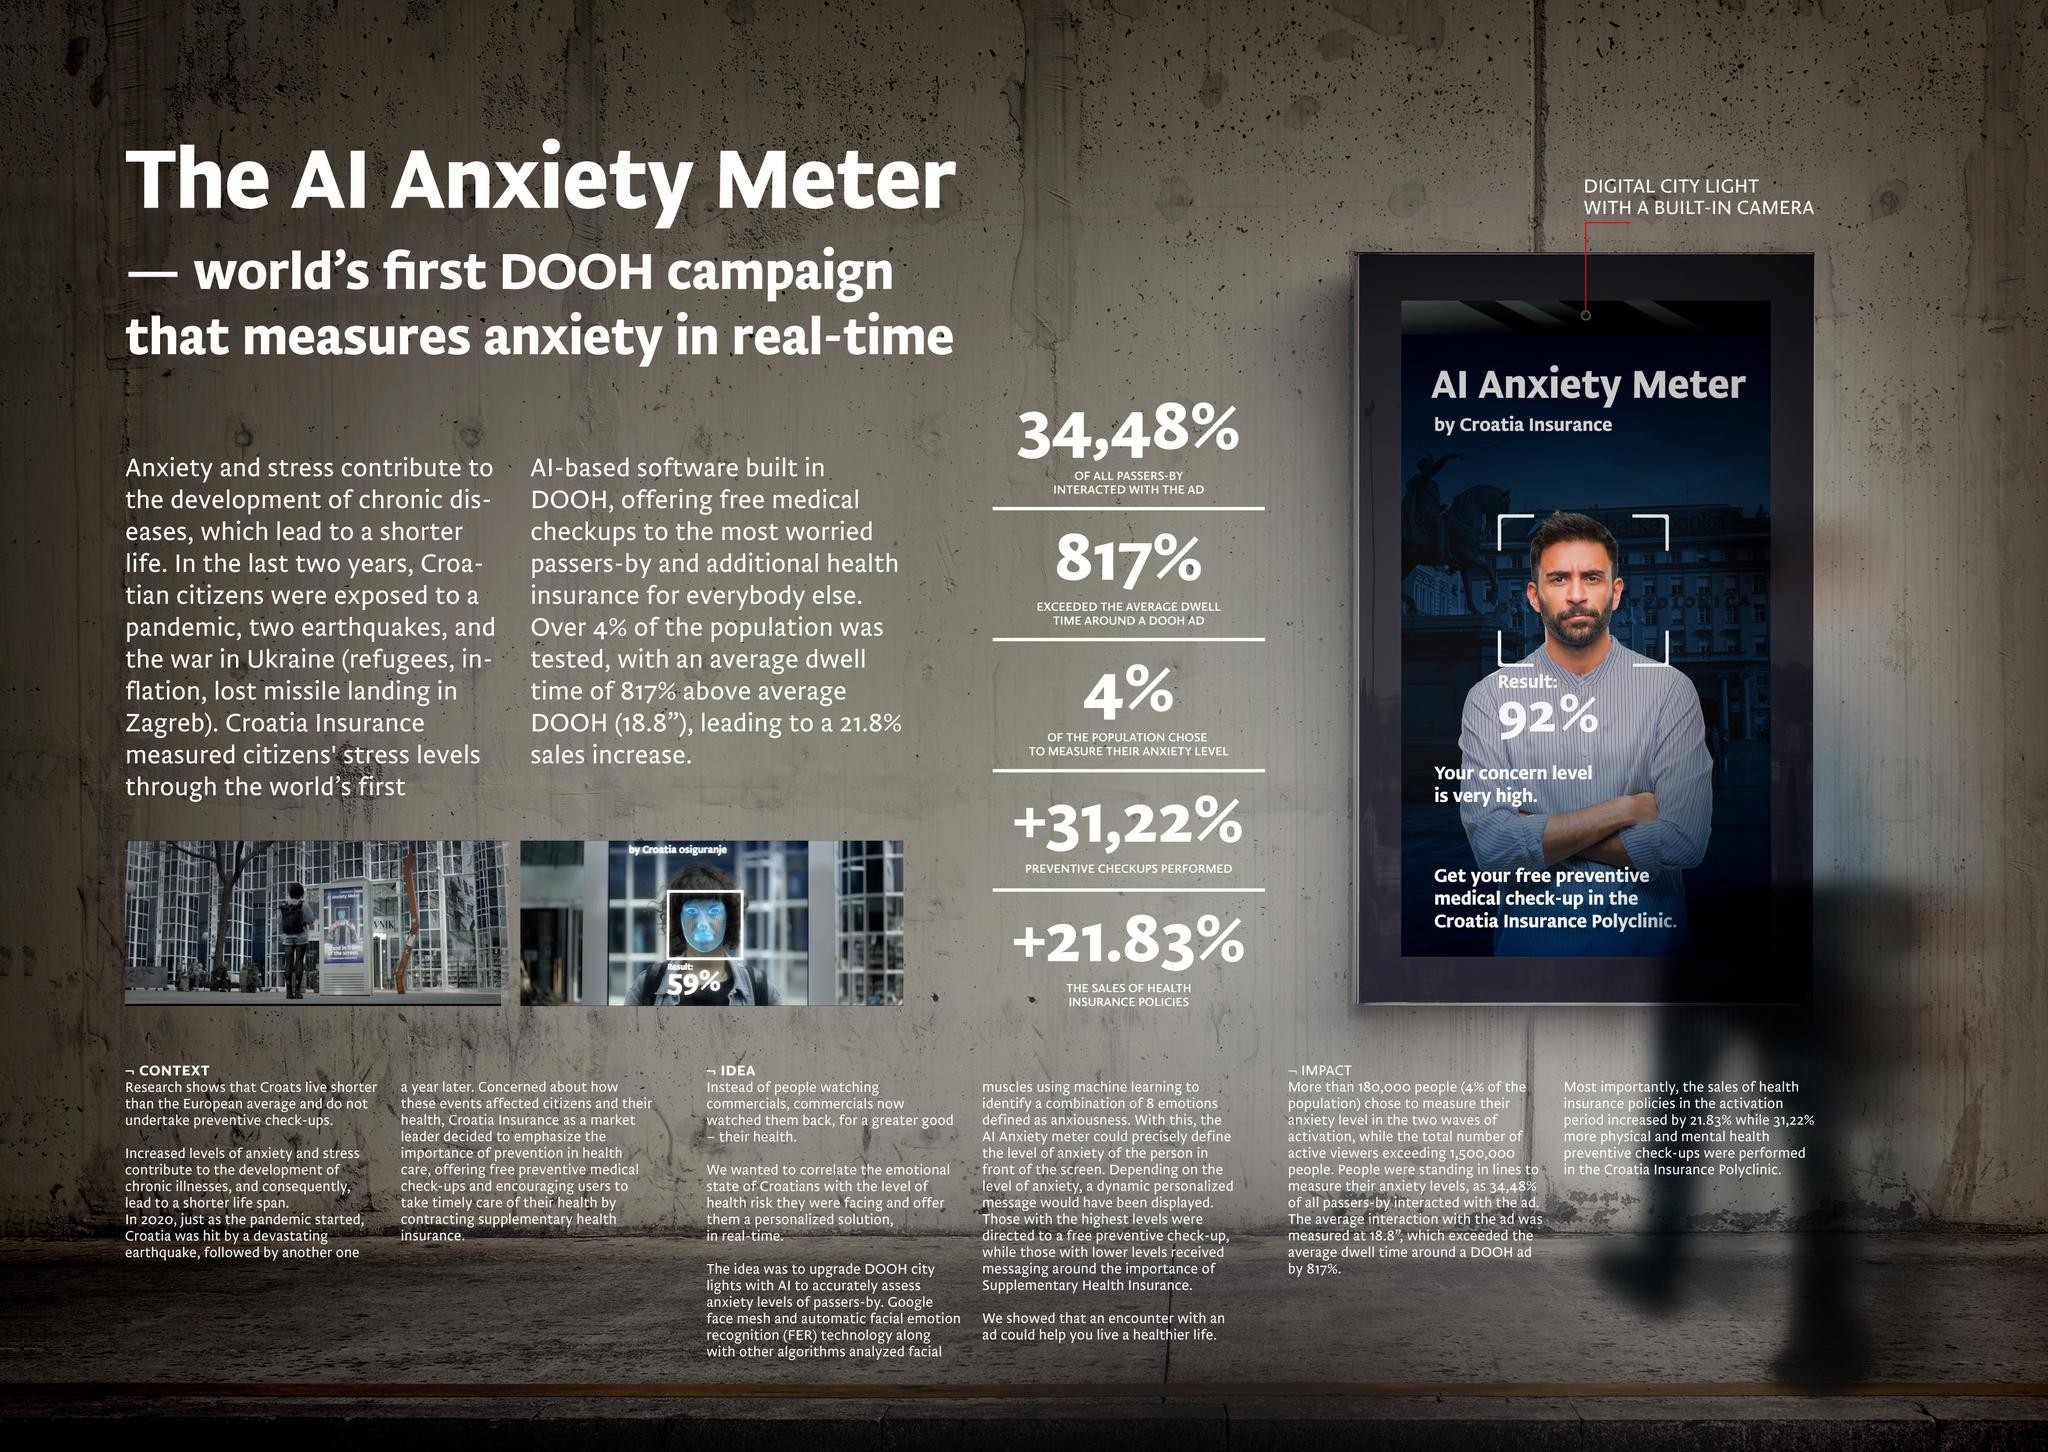 AI ANXIETY METER